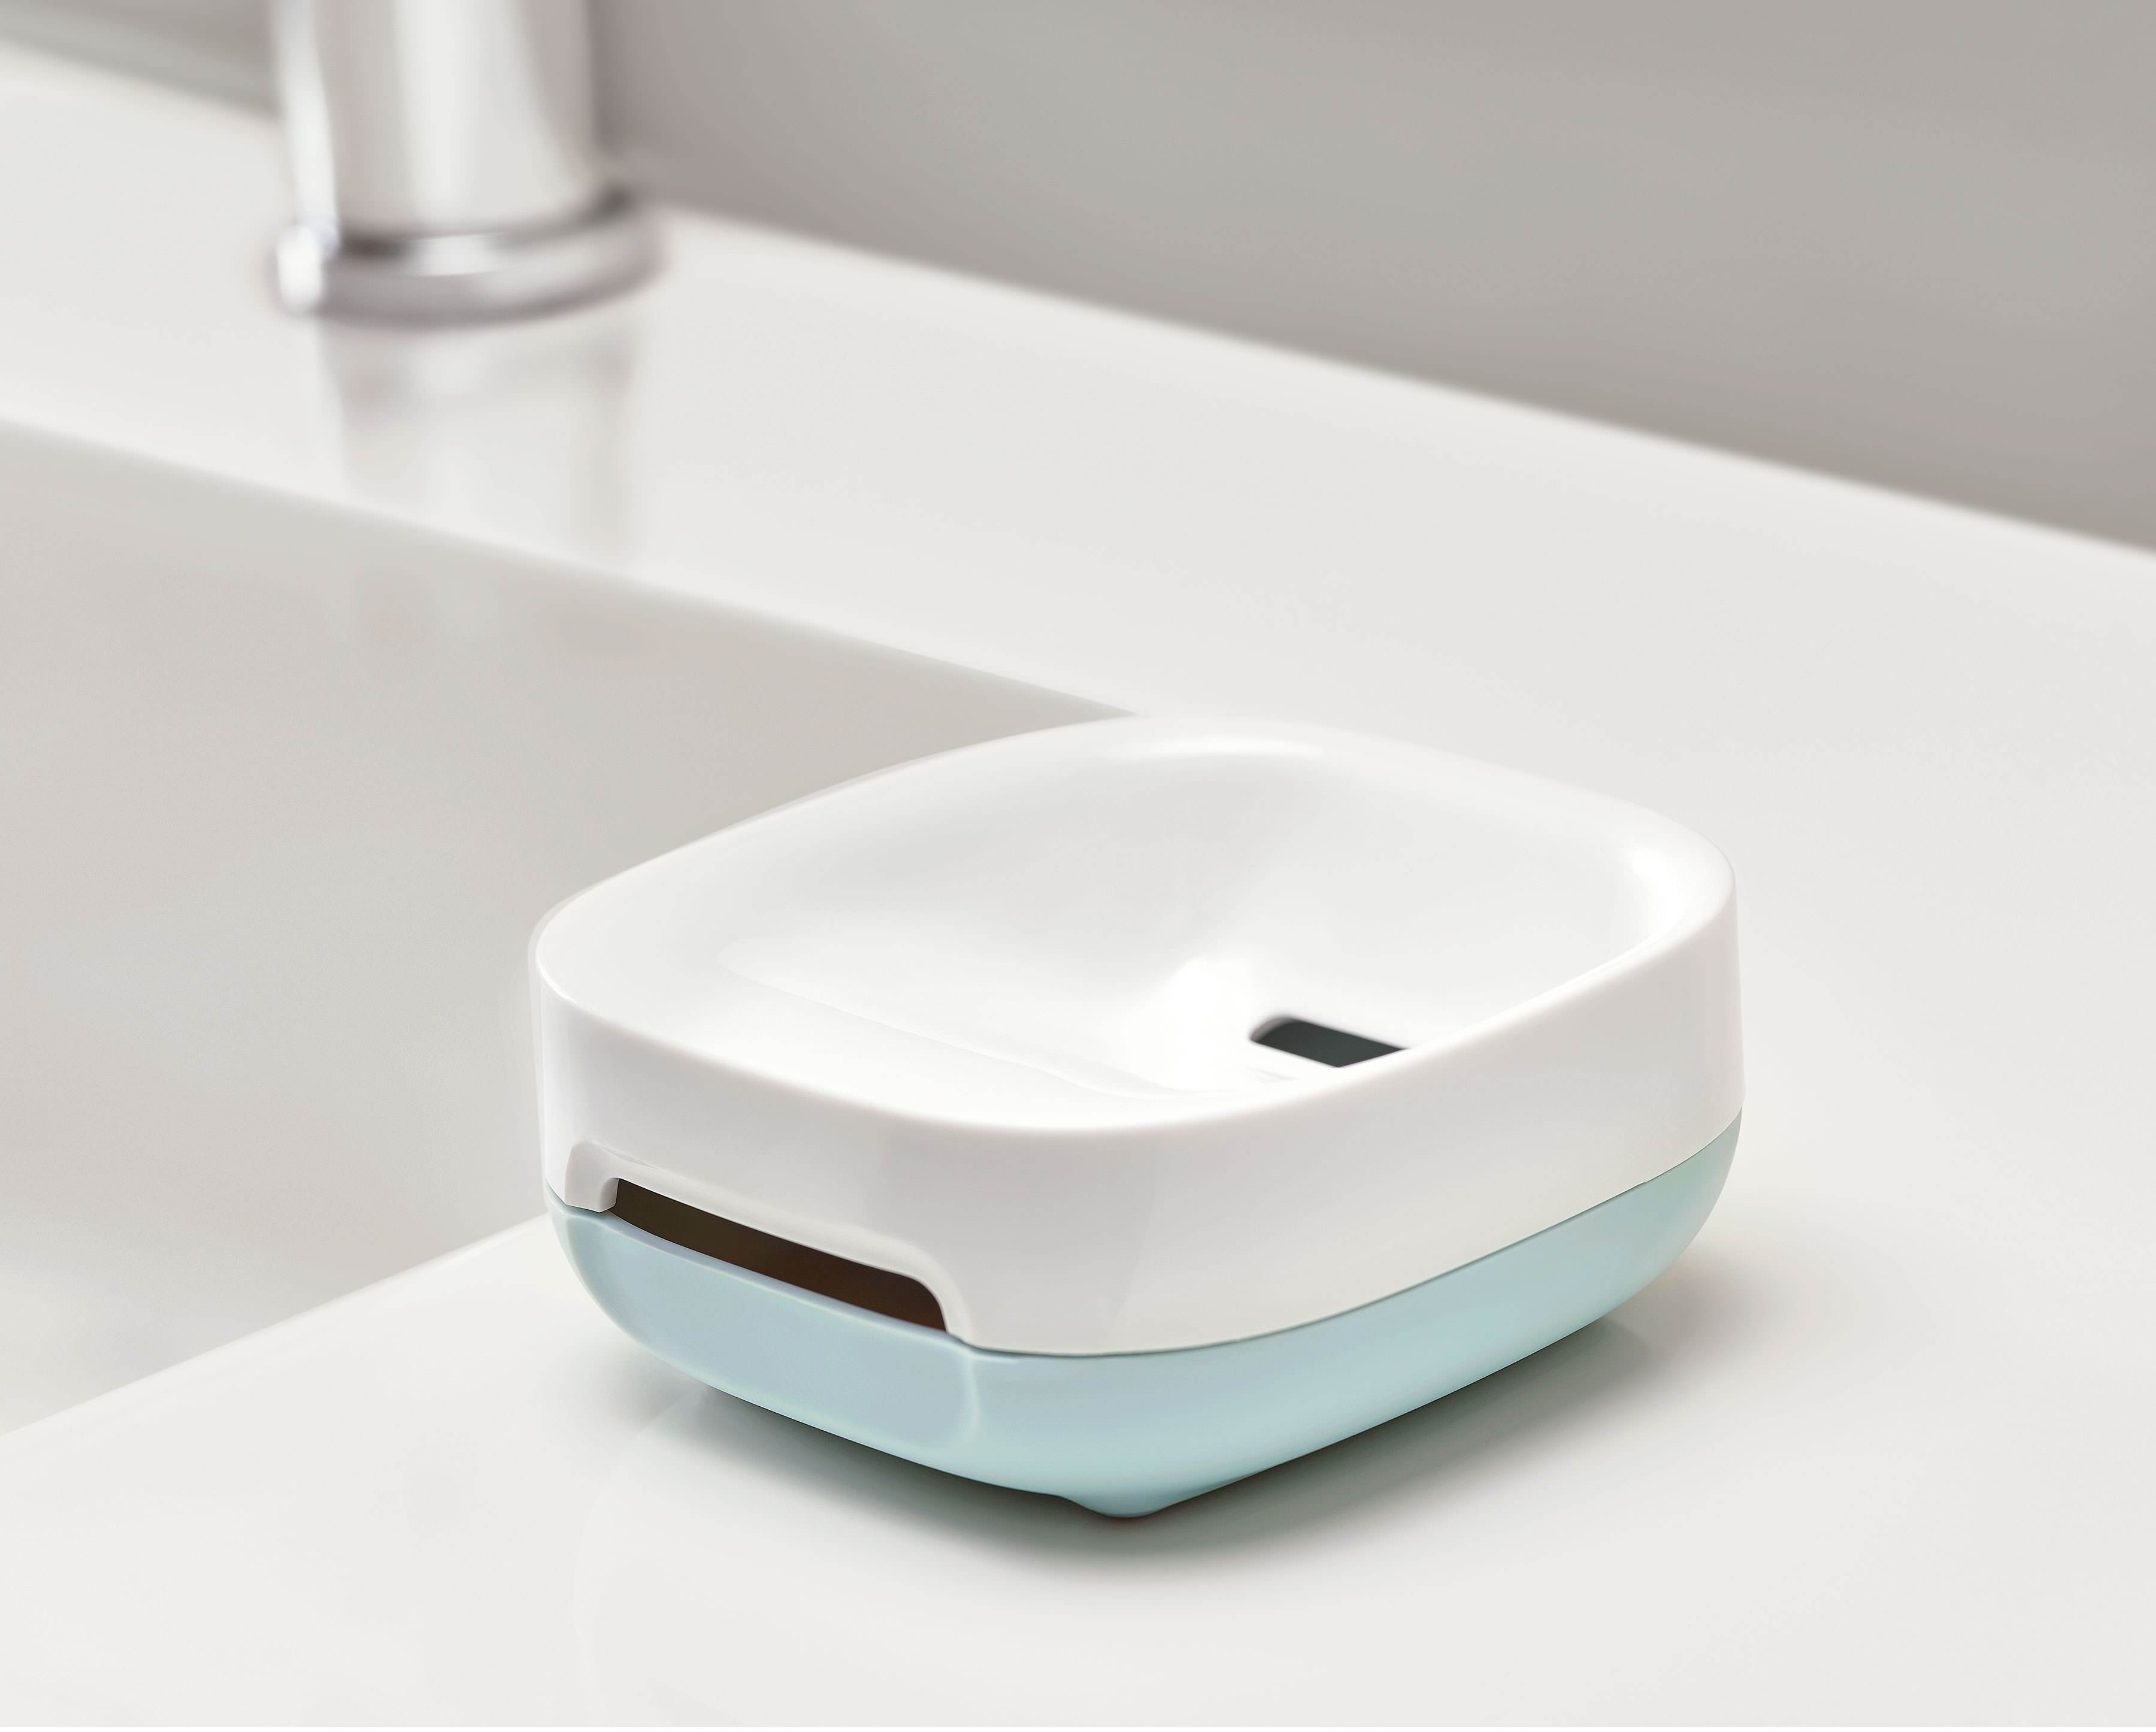 BEON.COM.AU  This clever soap dish has a unique, sloping design that saves space and allows any excess water or suds from your soap to neatly drain away.  Unique, sloping design saves space Holds a full-size soap bar in less space Clever angled base allows soap to drain Dismantles for easy cleaning Ventilate... Joseph Joseph at BEON.COM.AU